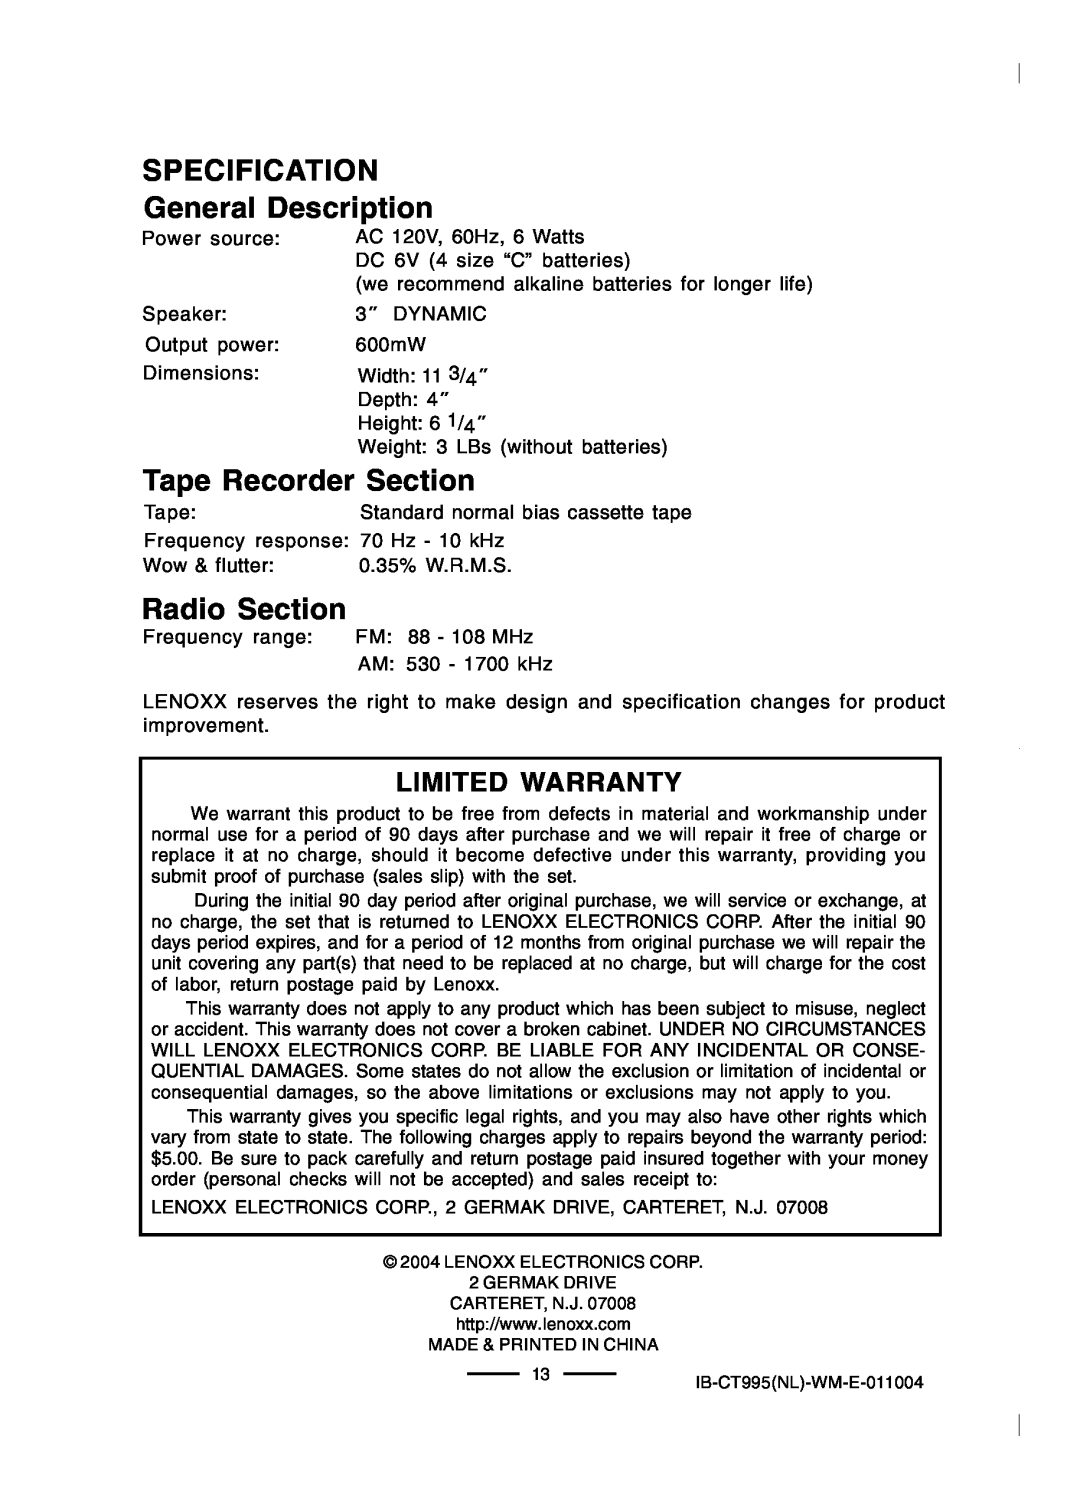 Lenoxx Electronics CT-995 SPECIFICATION General Description, Tape Recorder Section, Radio Section, Limited Warranty 